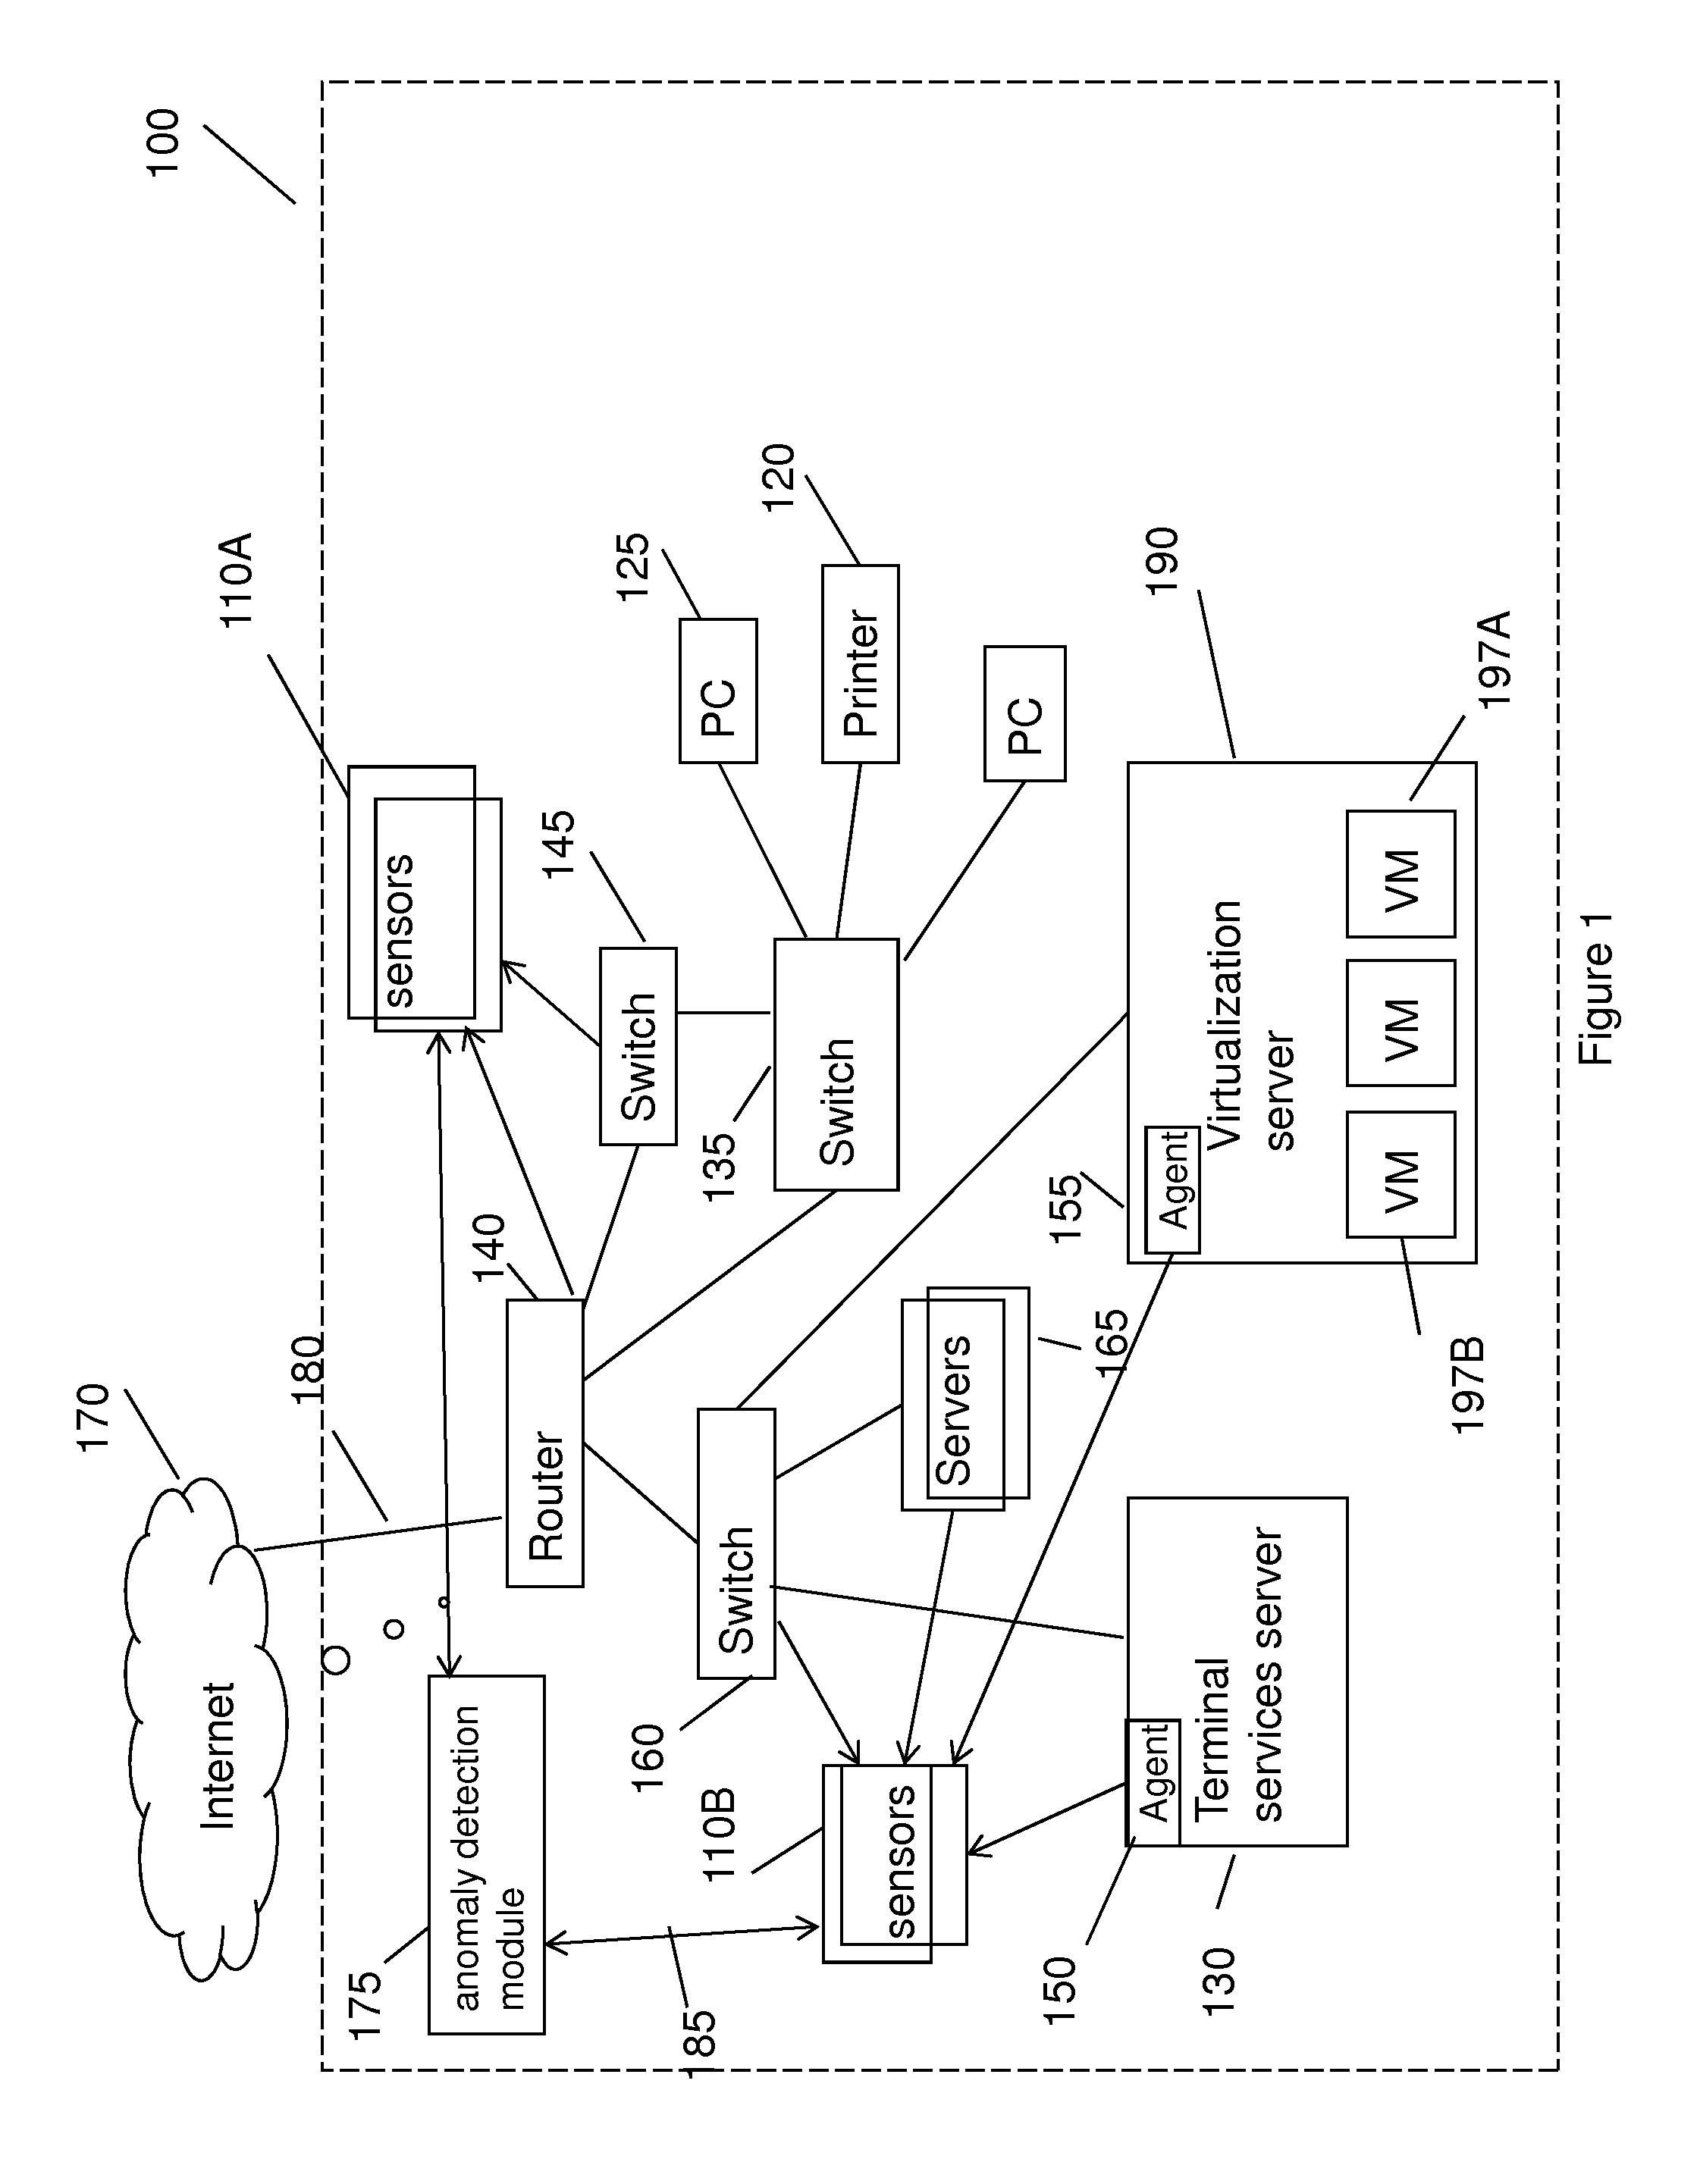 Method for detecting anomaly action within a computer network